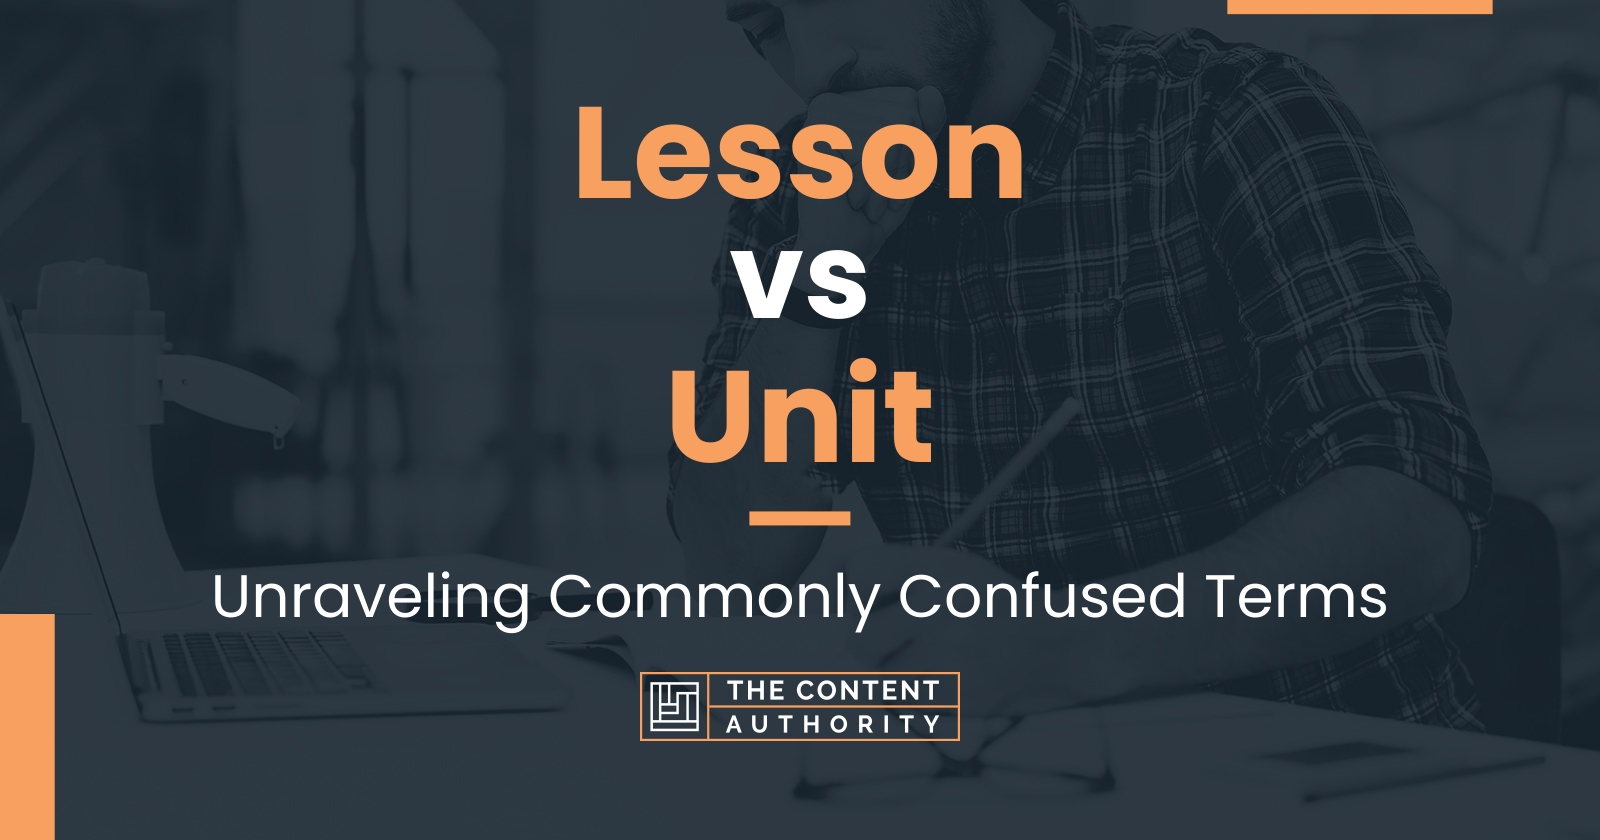 Lesson vs Unit: Unraveling Commonly Confused Terms